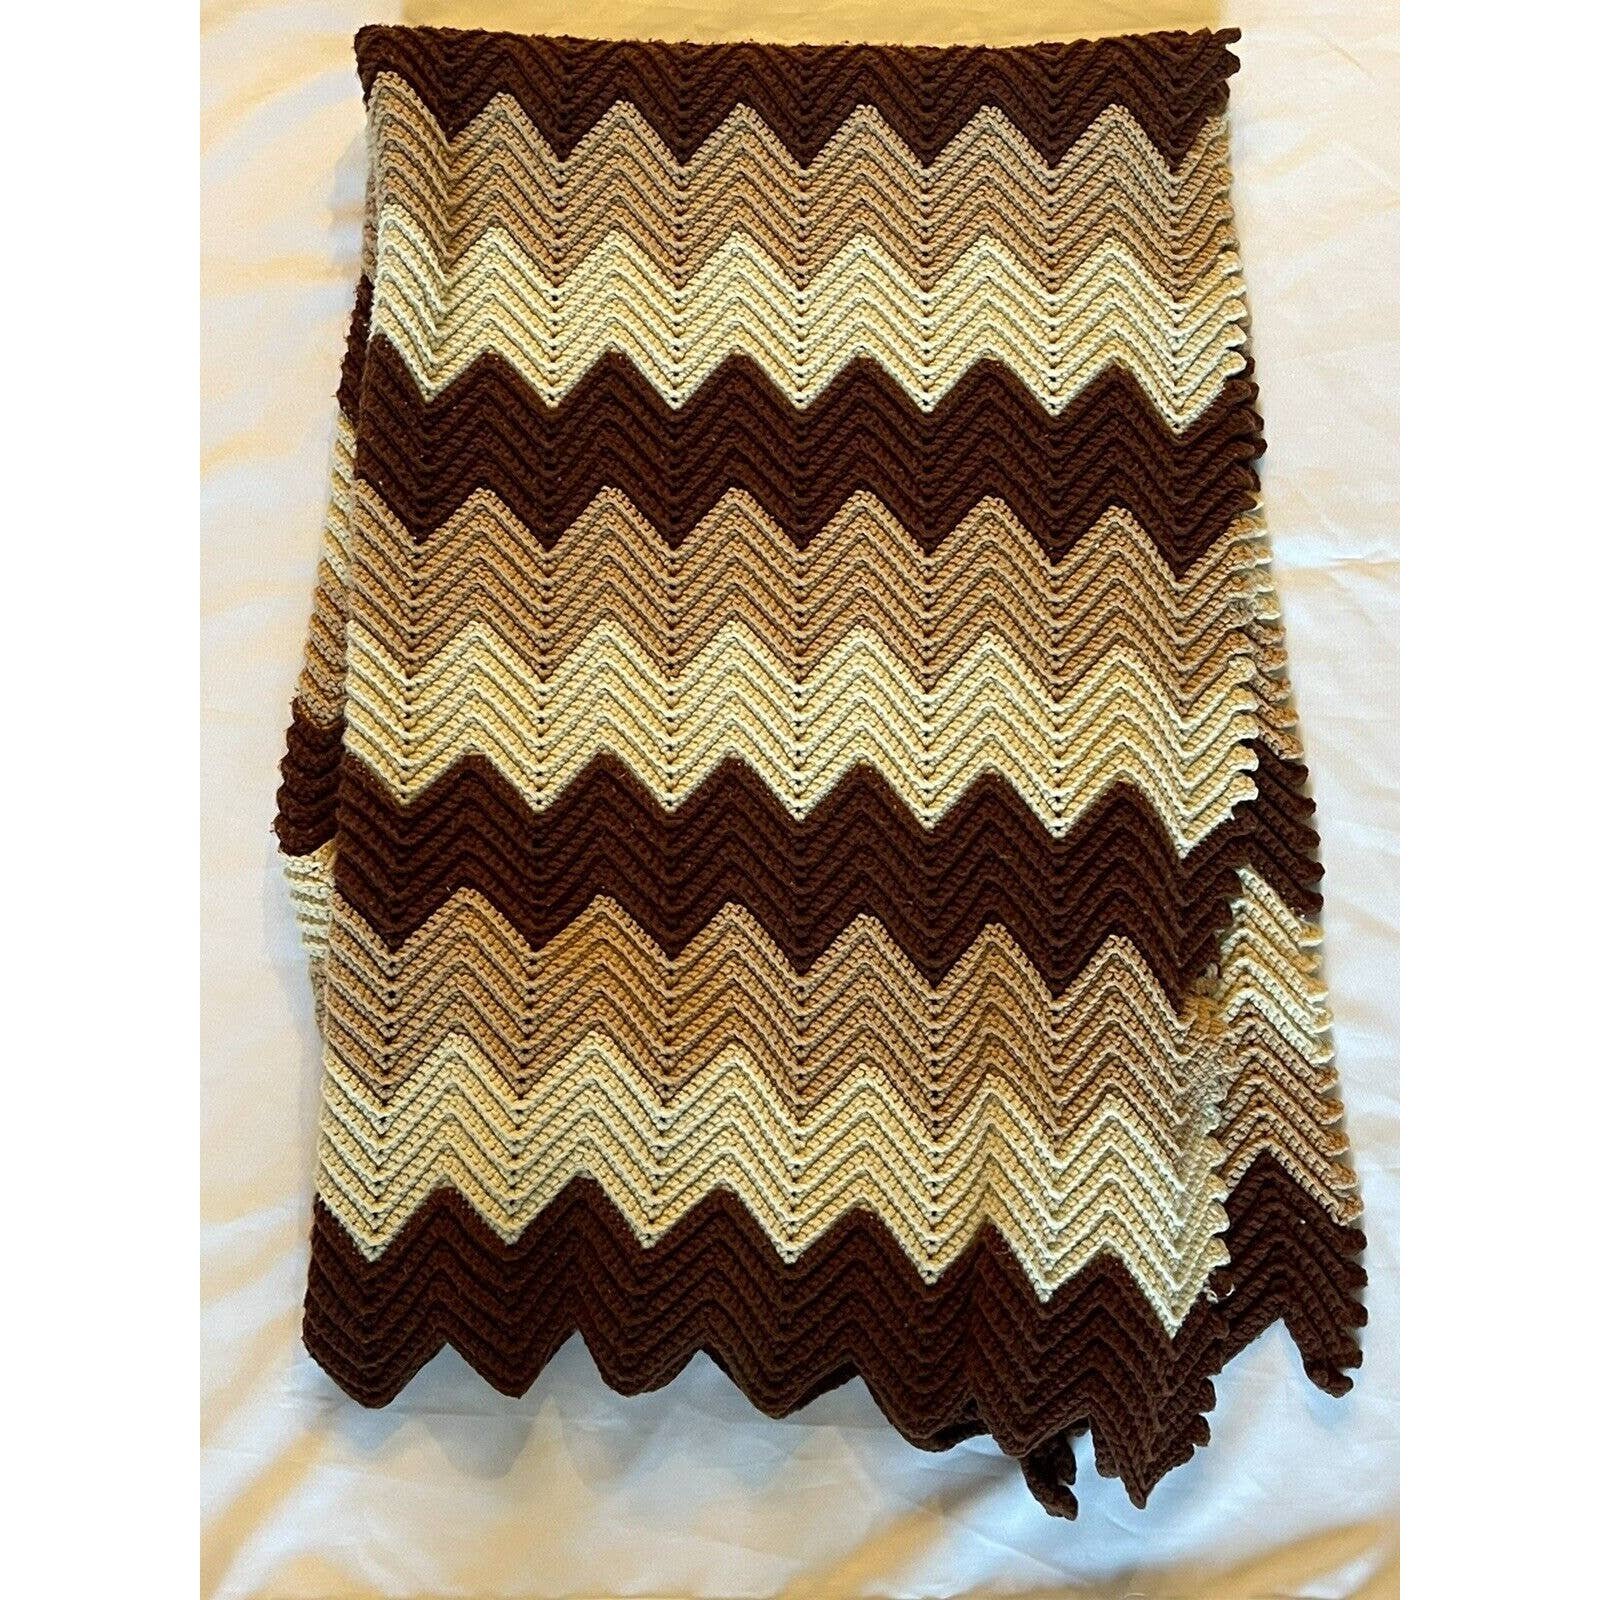 Vintage 1970s retro afghan, never used! Off white, Tan 